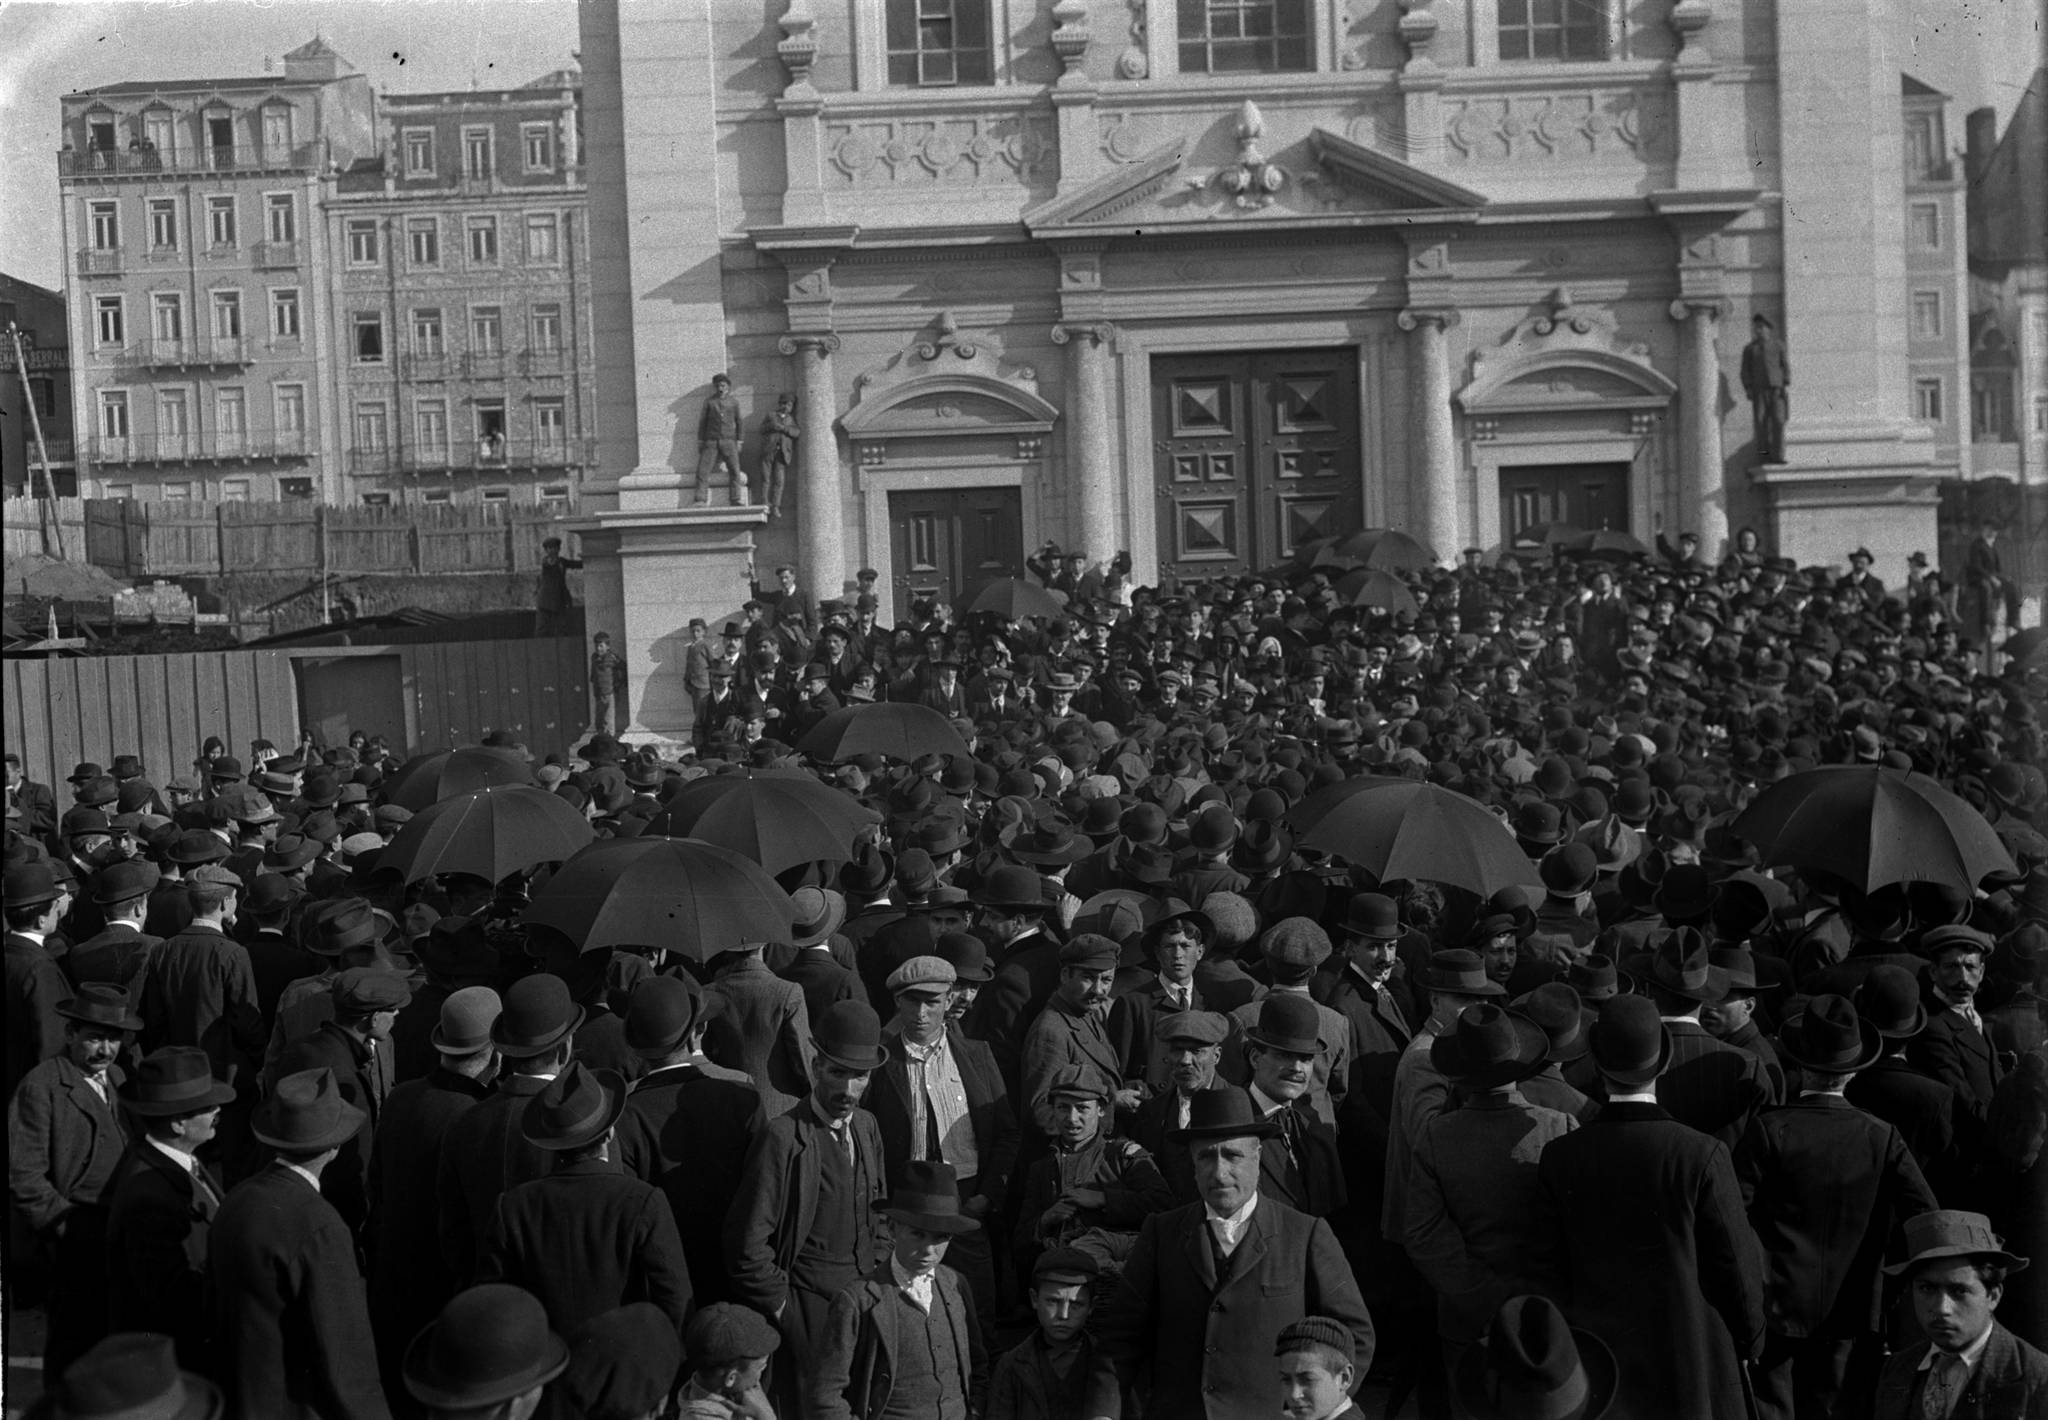 Comício de protesto, junto à igreja dos Anjos, contra a expulsão das chinesas (Joshua Benoliel, 1911) - Demonstration in Lisbon, Portugal, against the banishment of the "Chinese of the Worms" (a pair of Chinese healers that were banned from illegally practising medicine), 26 November 1911.